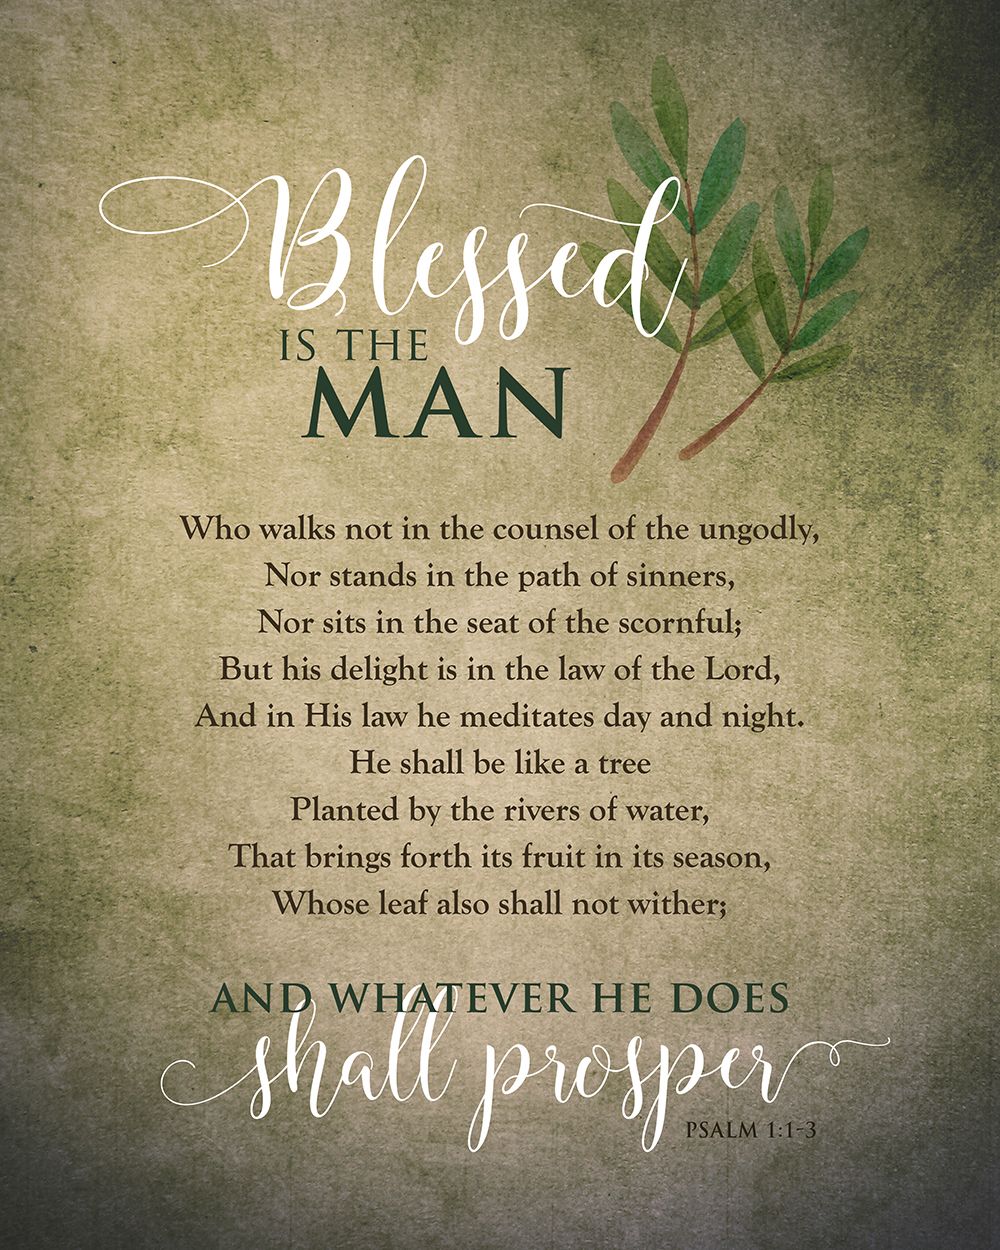 Blessed is the man_8x10_Psalm 1_1-3_100dpi.jpg